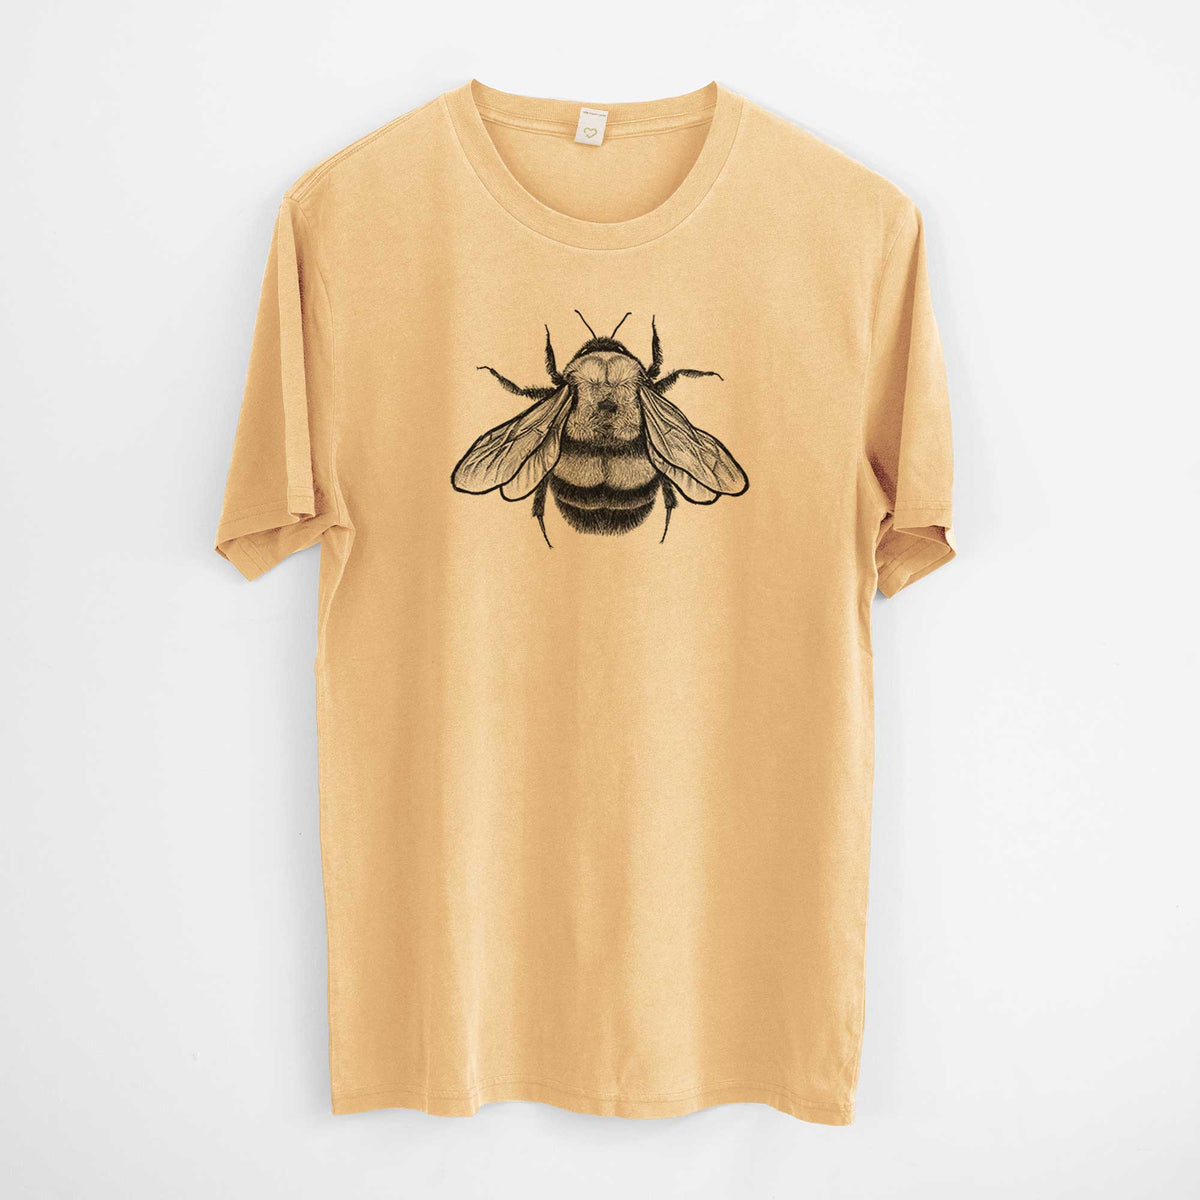 Bombus Affinis - Rusty-Patched Bumble Bee -  Mineral Wash 100% Organic Cotton Short Sleeve